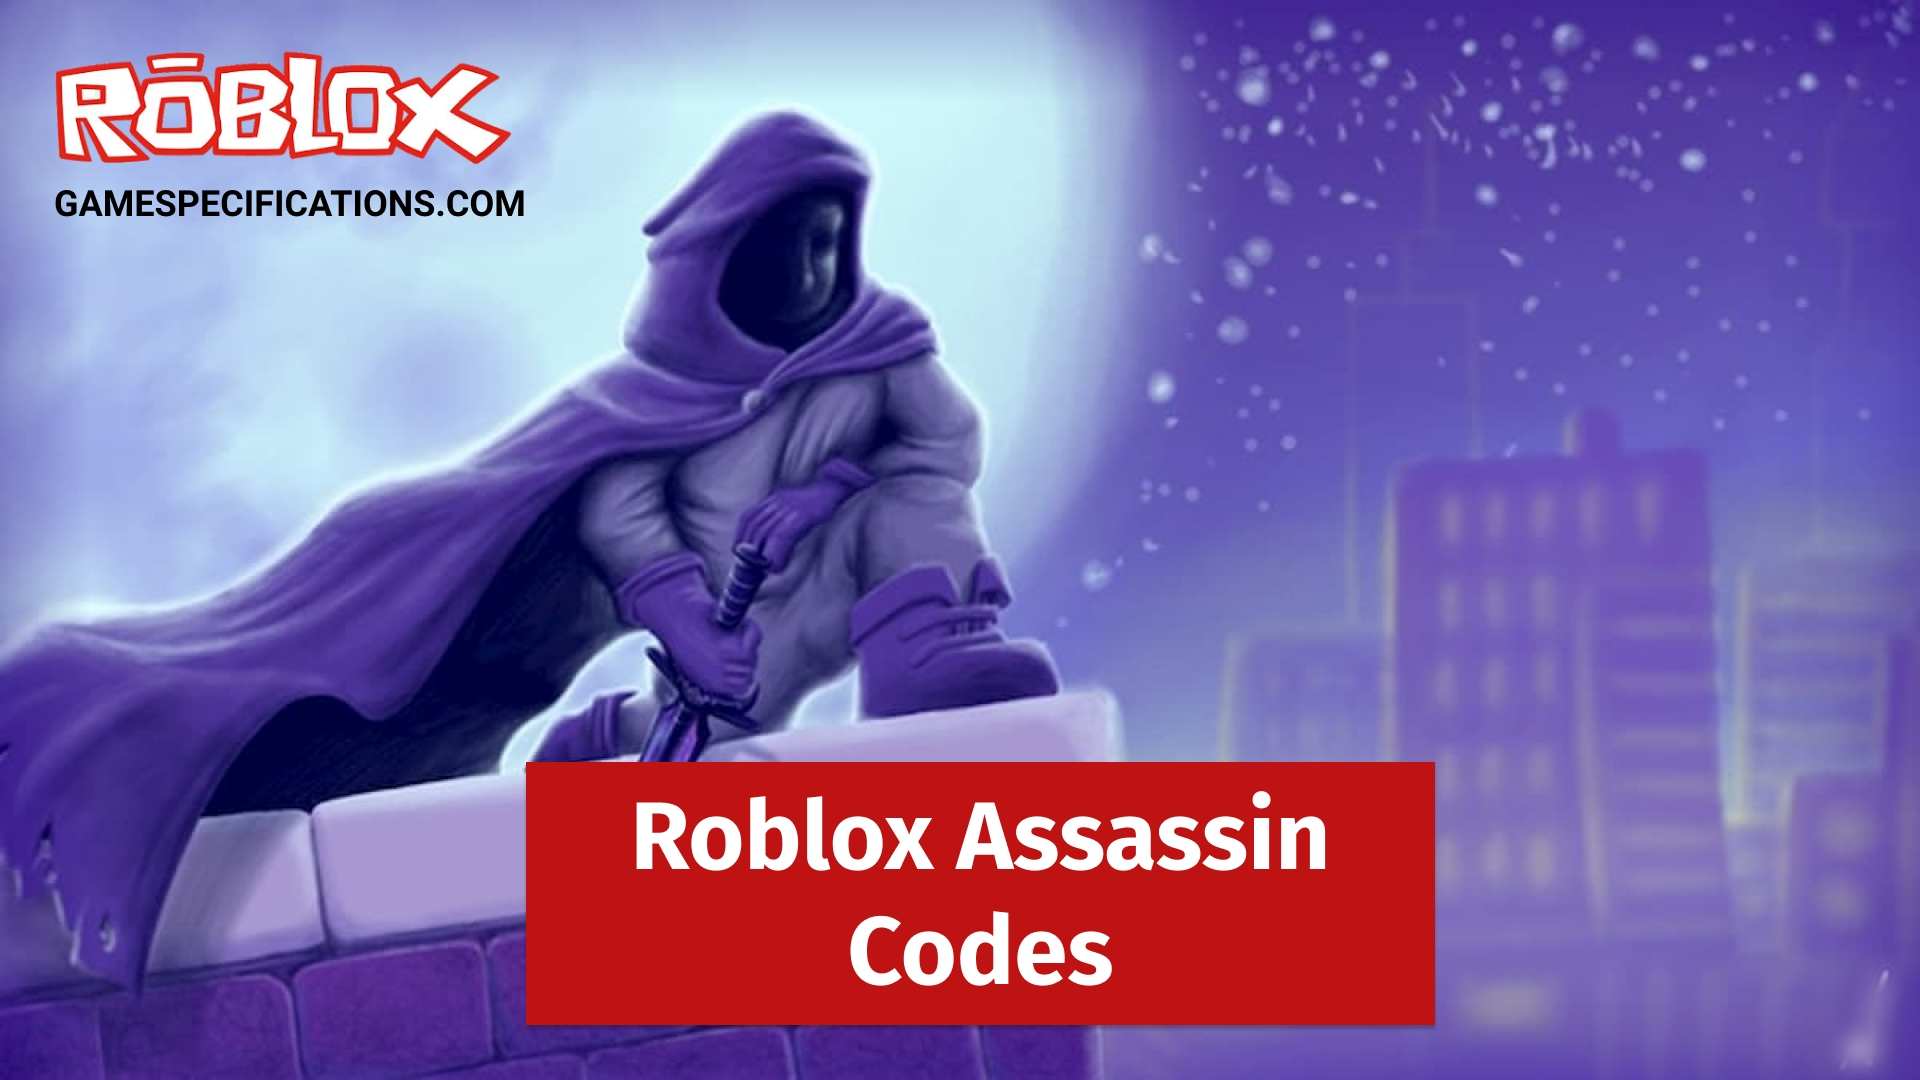 Roblox Assassin Codes July 2021 Game Specifications - the roblox assassin value list